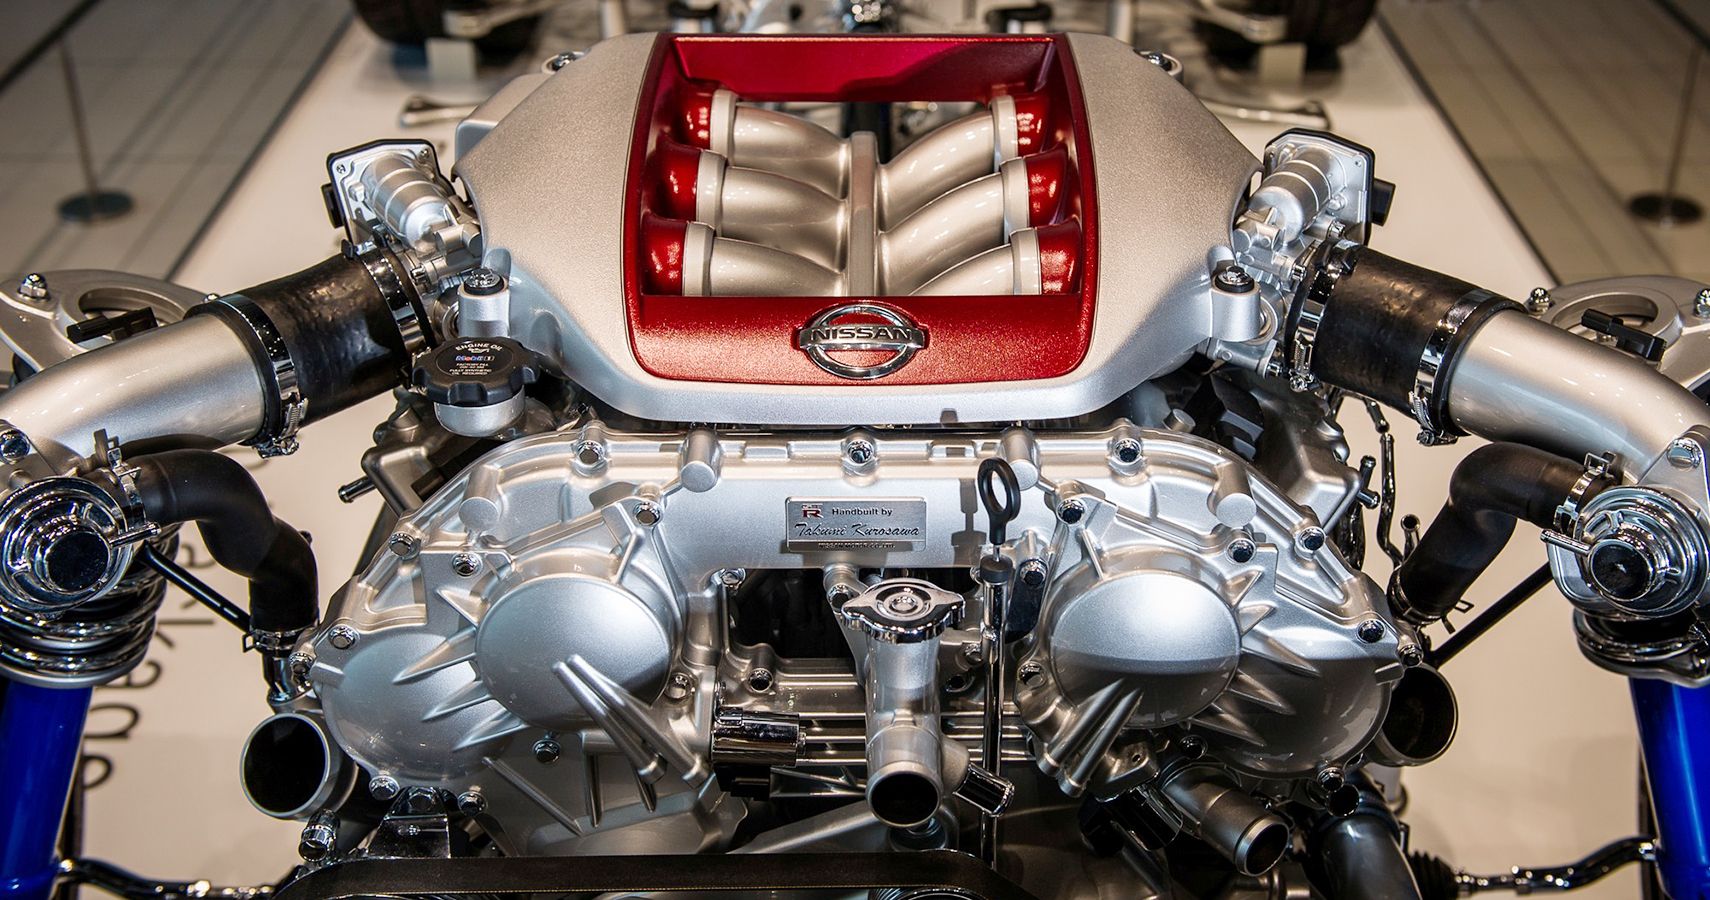 Why did Nissan put a V6 in the GT-R if its the same displacement as some  V8s, is not shared with any other vehicles, and the V8 would offer better  torque and